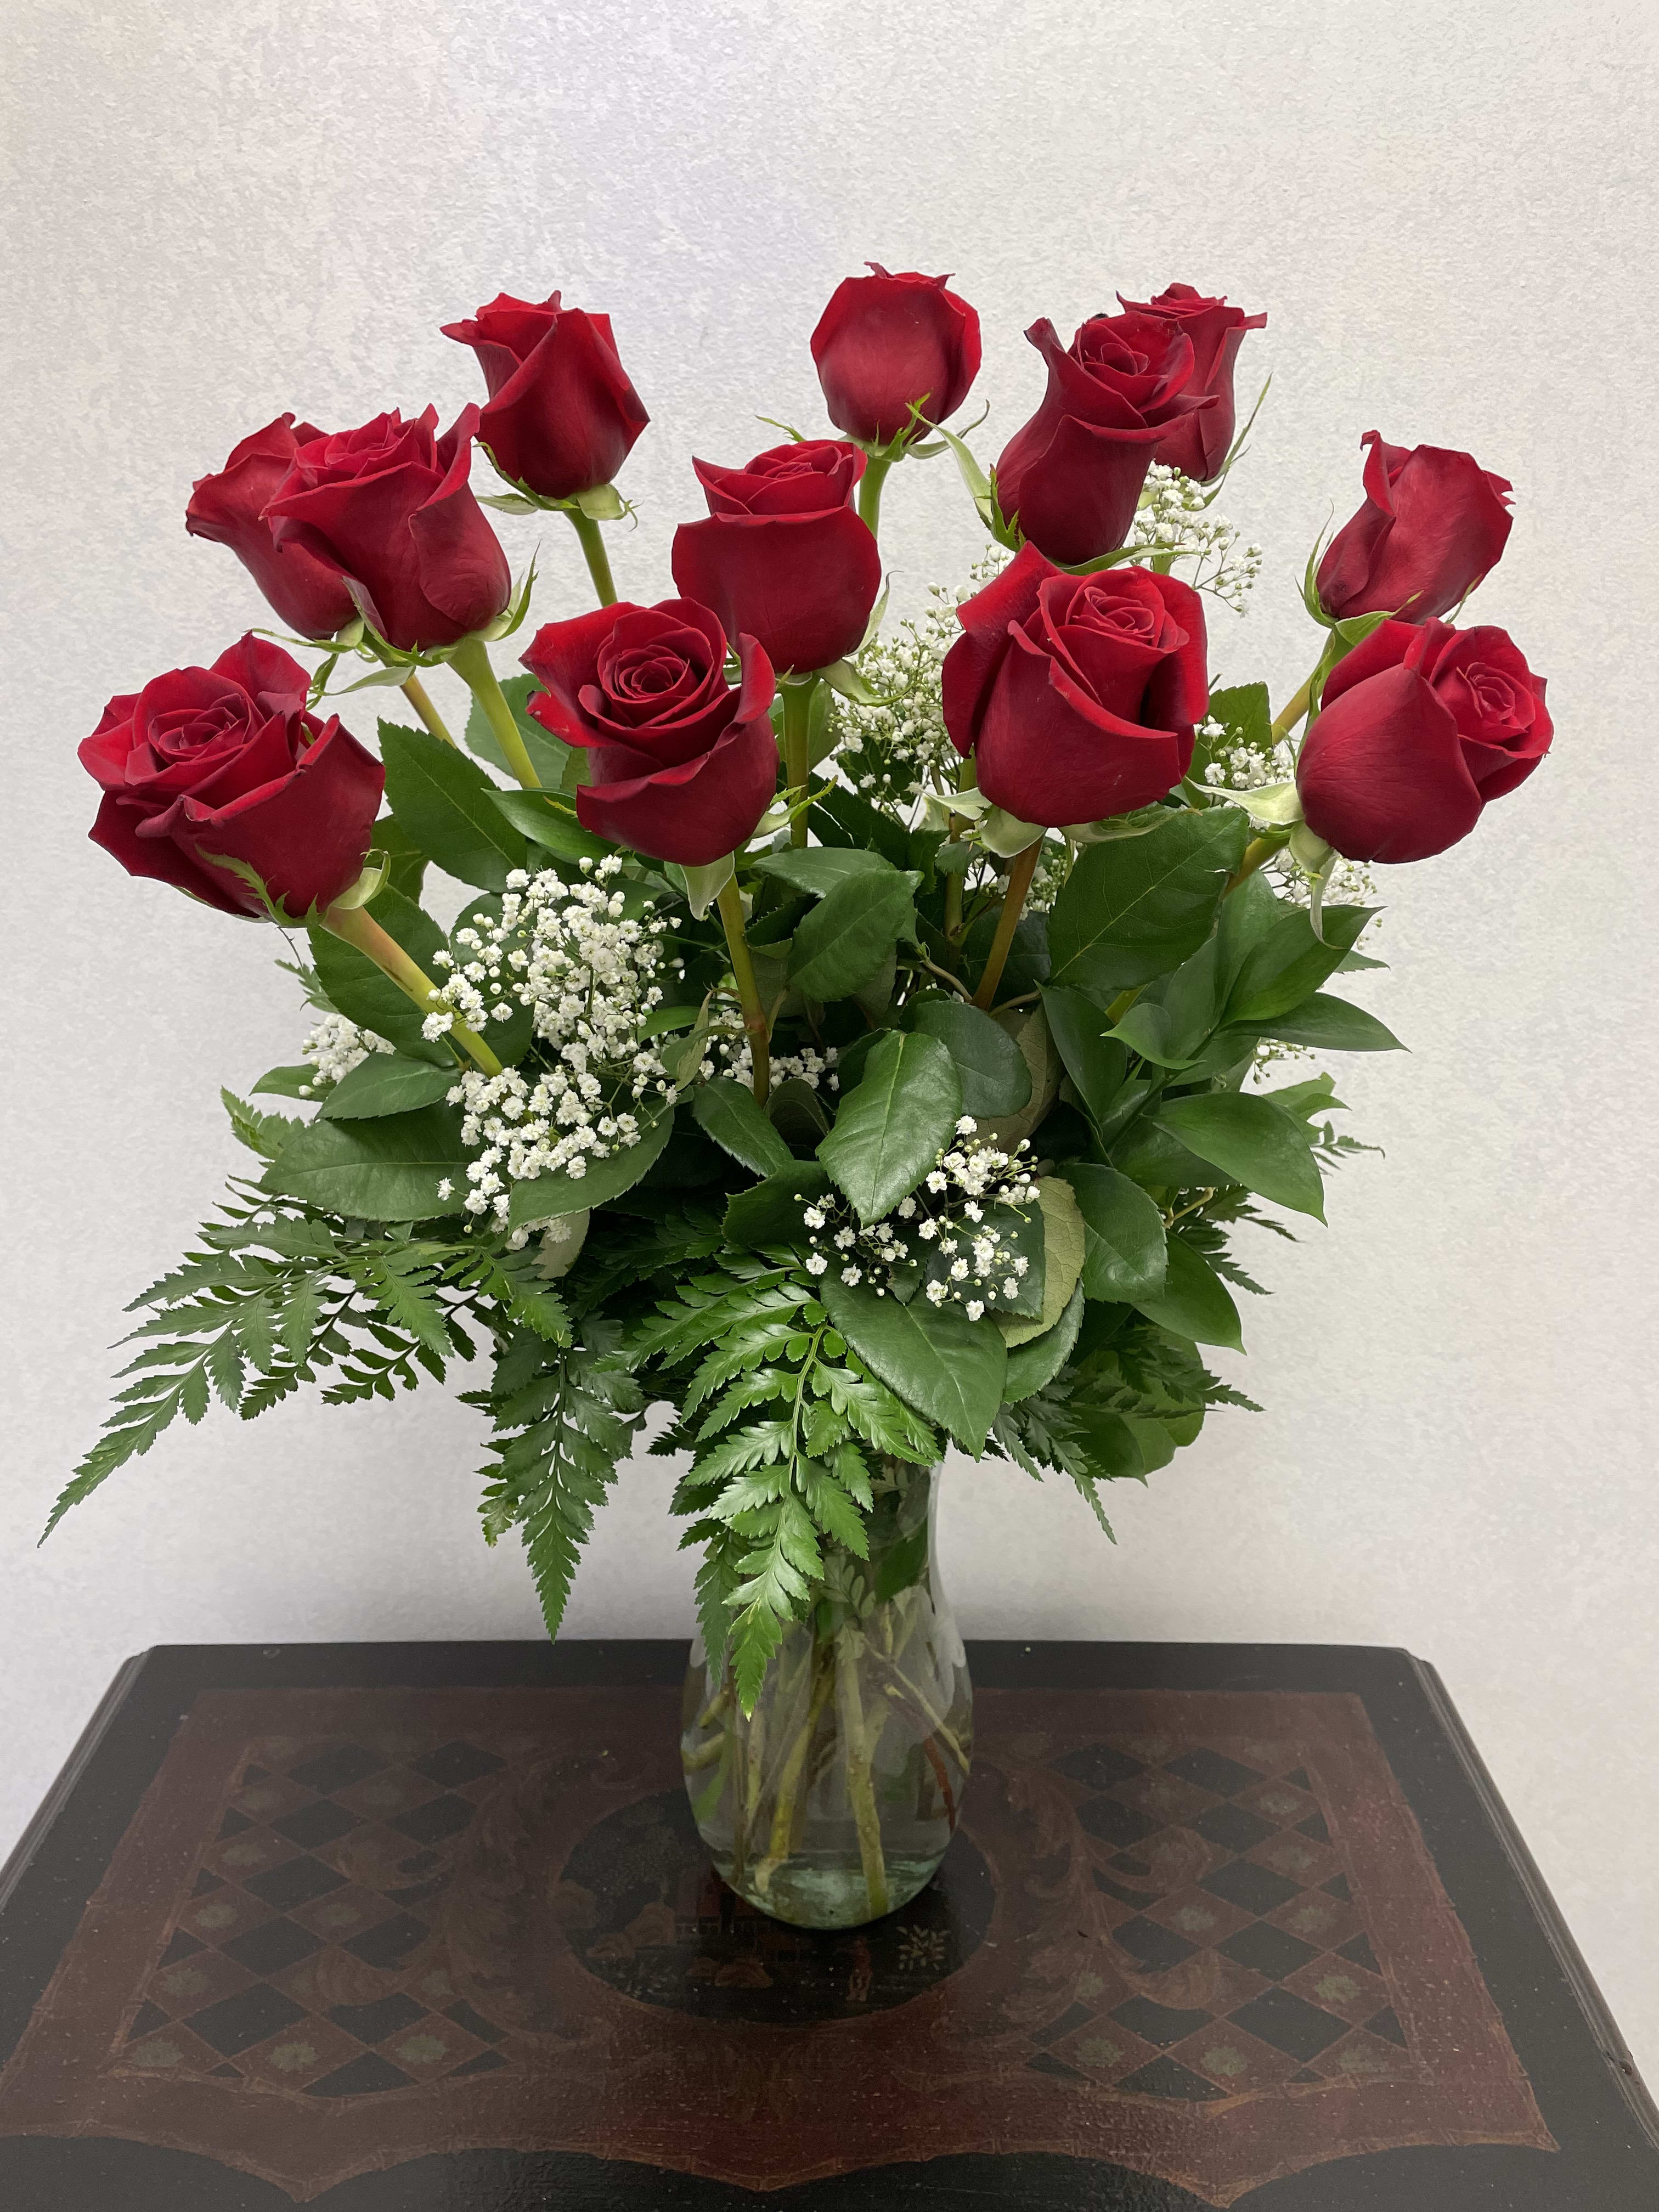 Red Rose Masterpiece - The Red Rose Masterpiece bouquet is a classic expression of love and affection. A bouquet of 12 red roses accented with lush greens, all beautifully arranged in a clear glass vase.